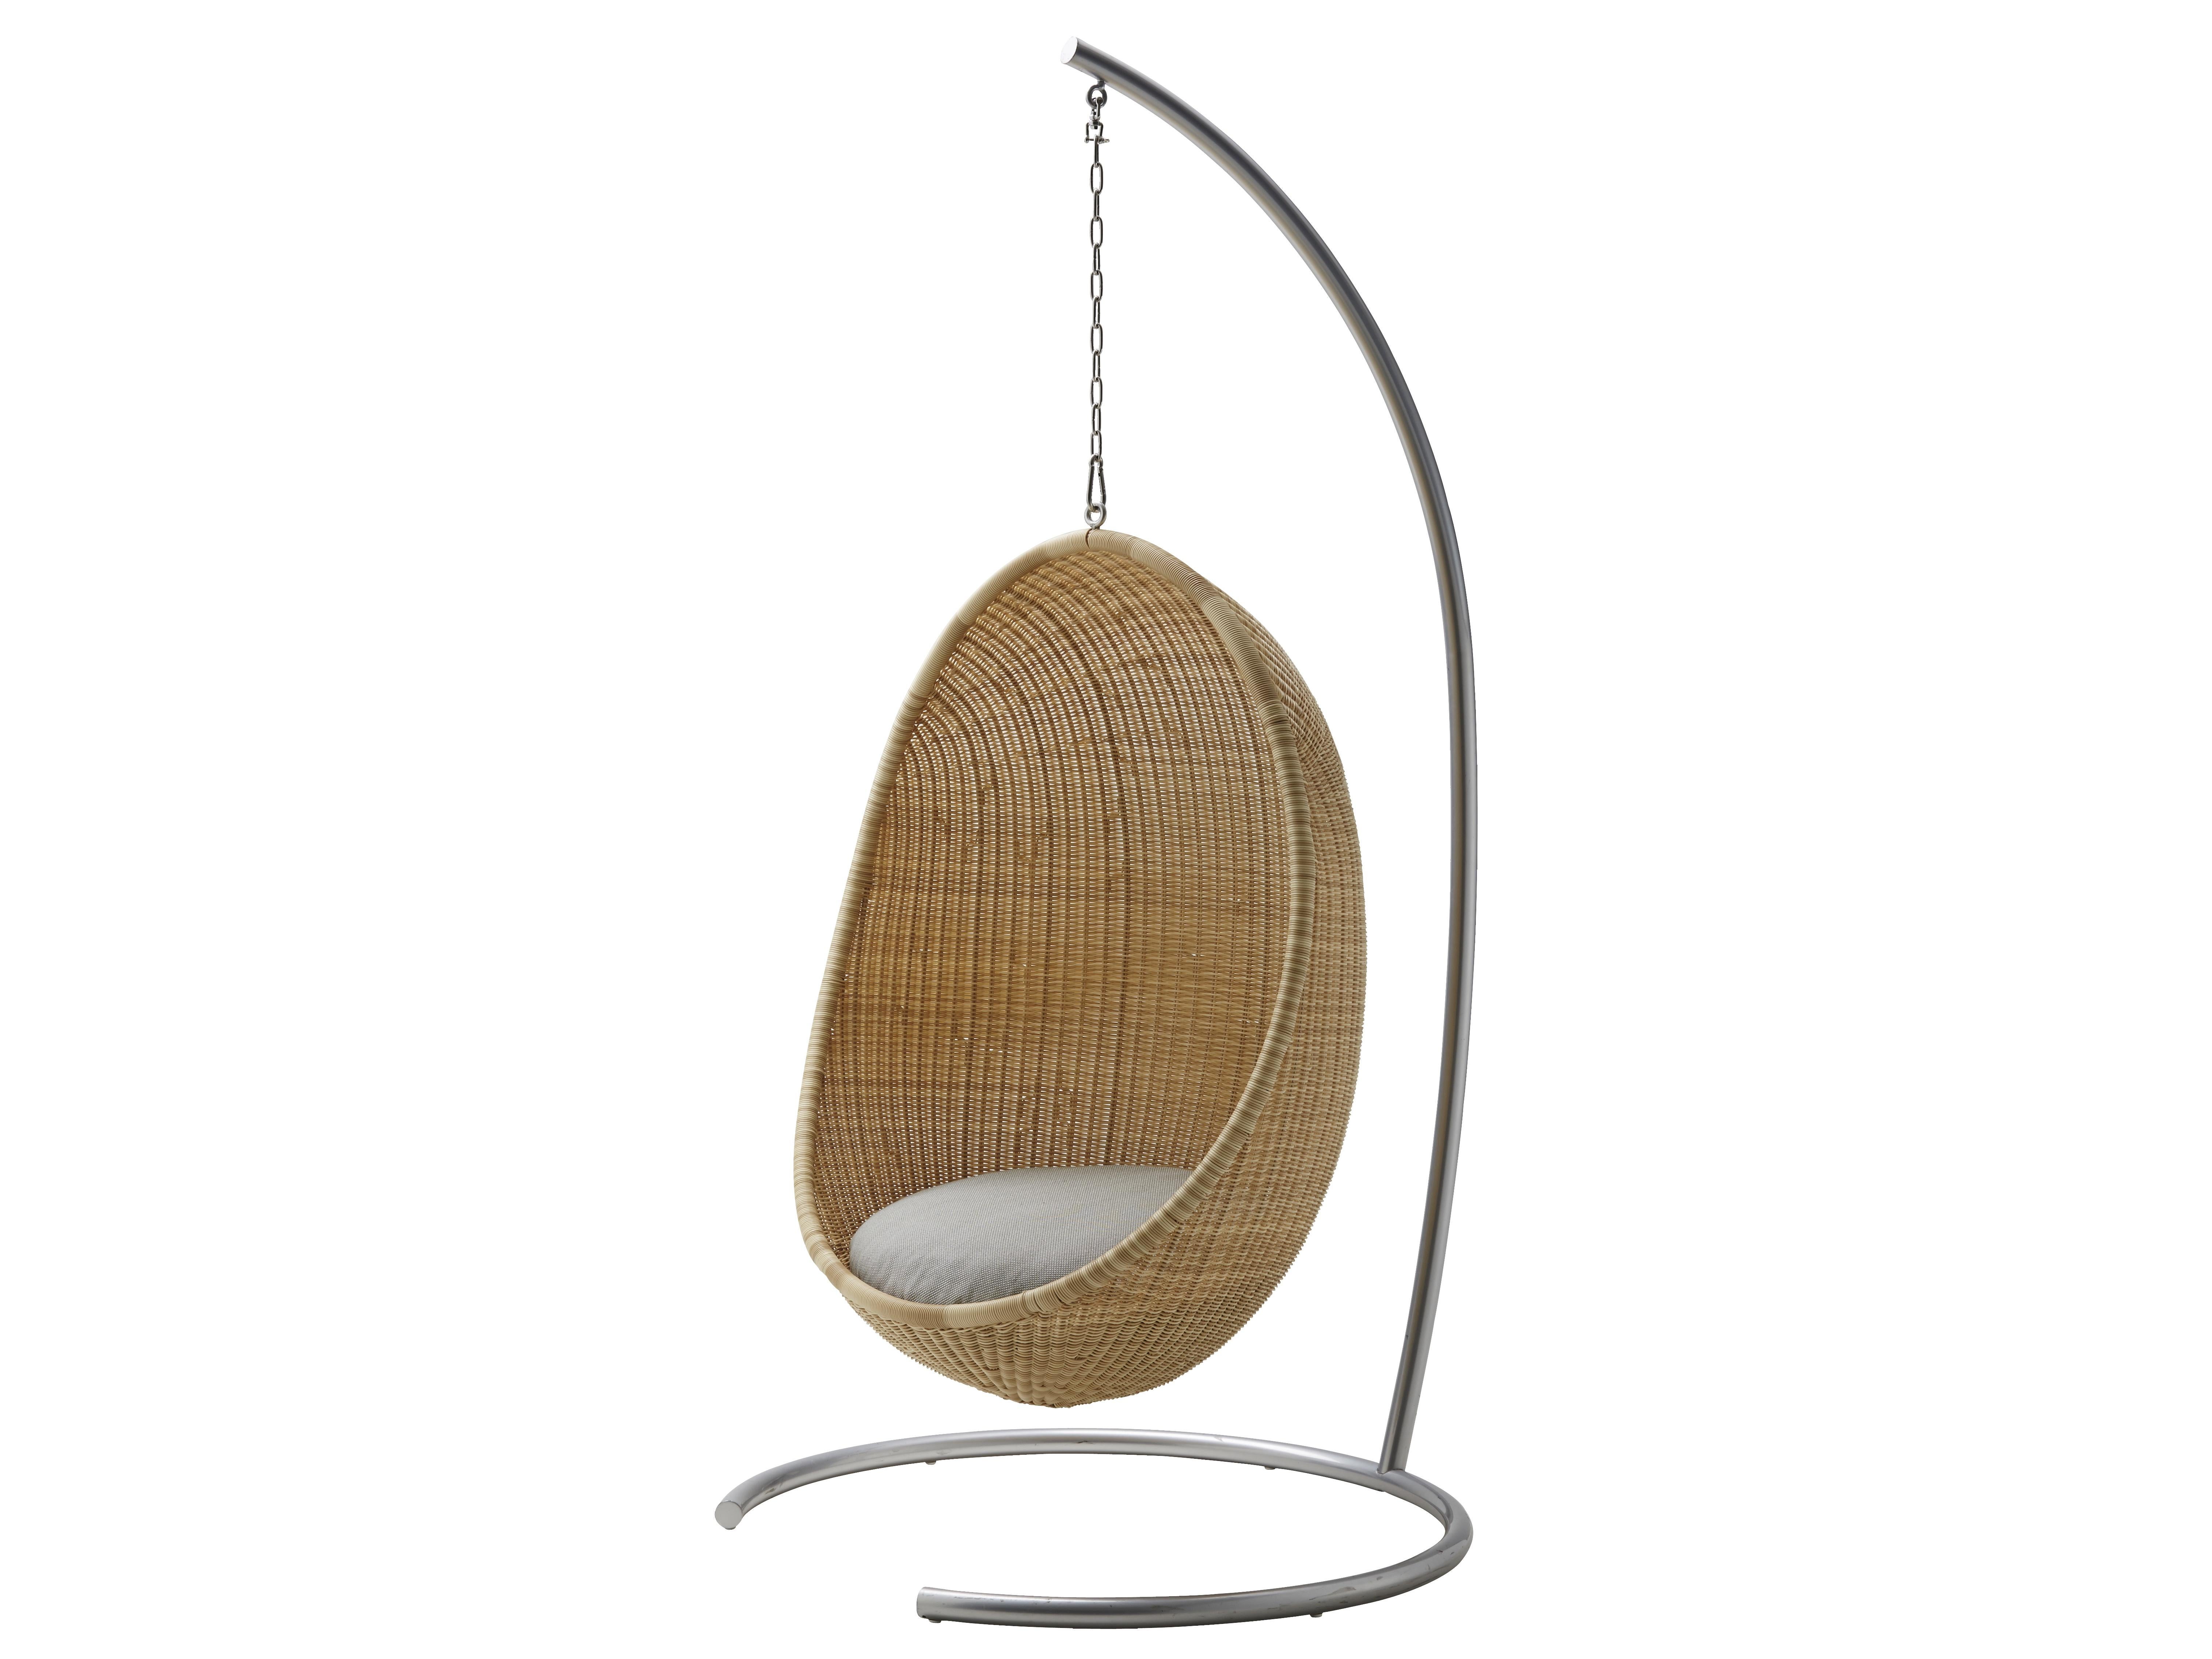 Cushion for Egg Hanging Chair by Nanna Ditzel, New Edition In Excellent Condition For Sale In Courbevoie, FR